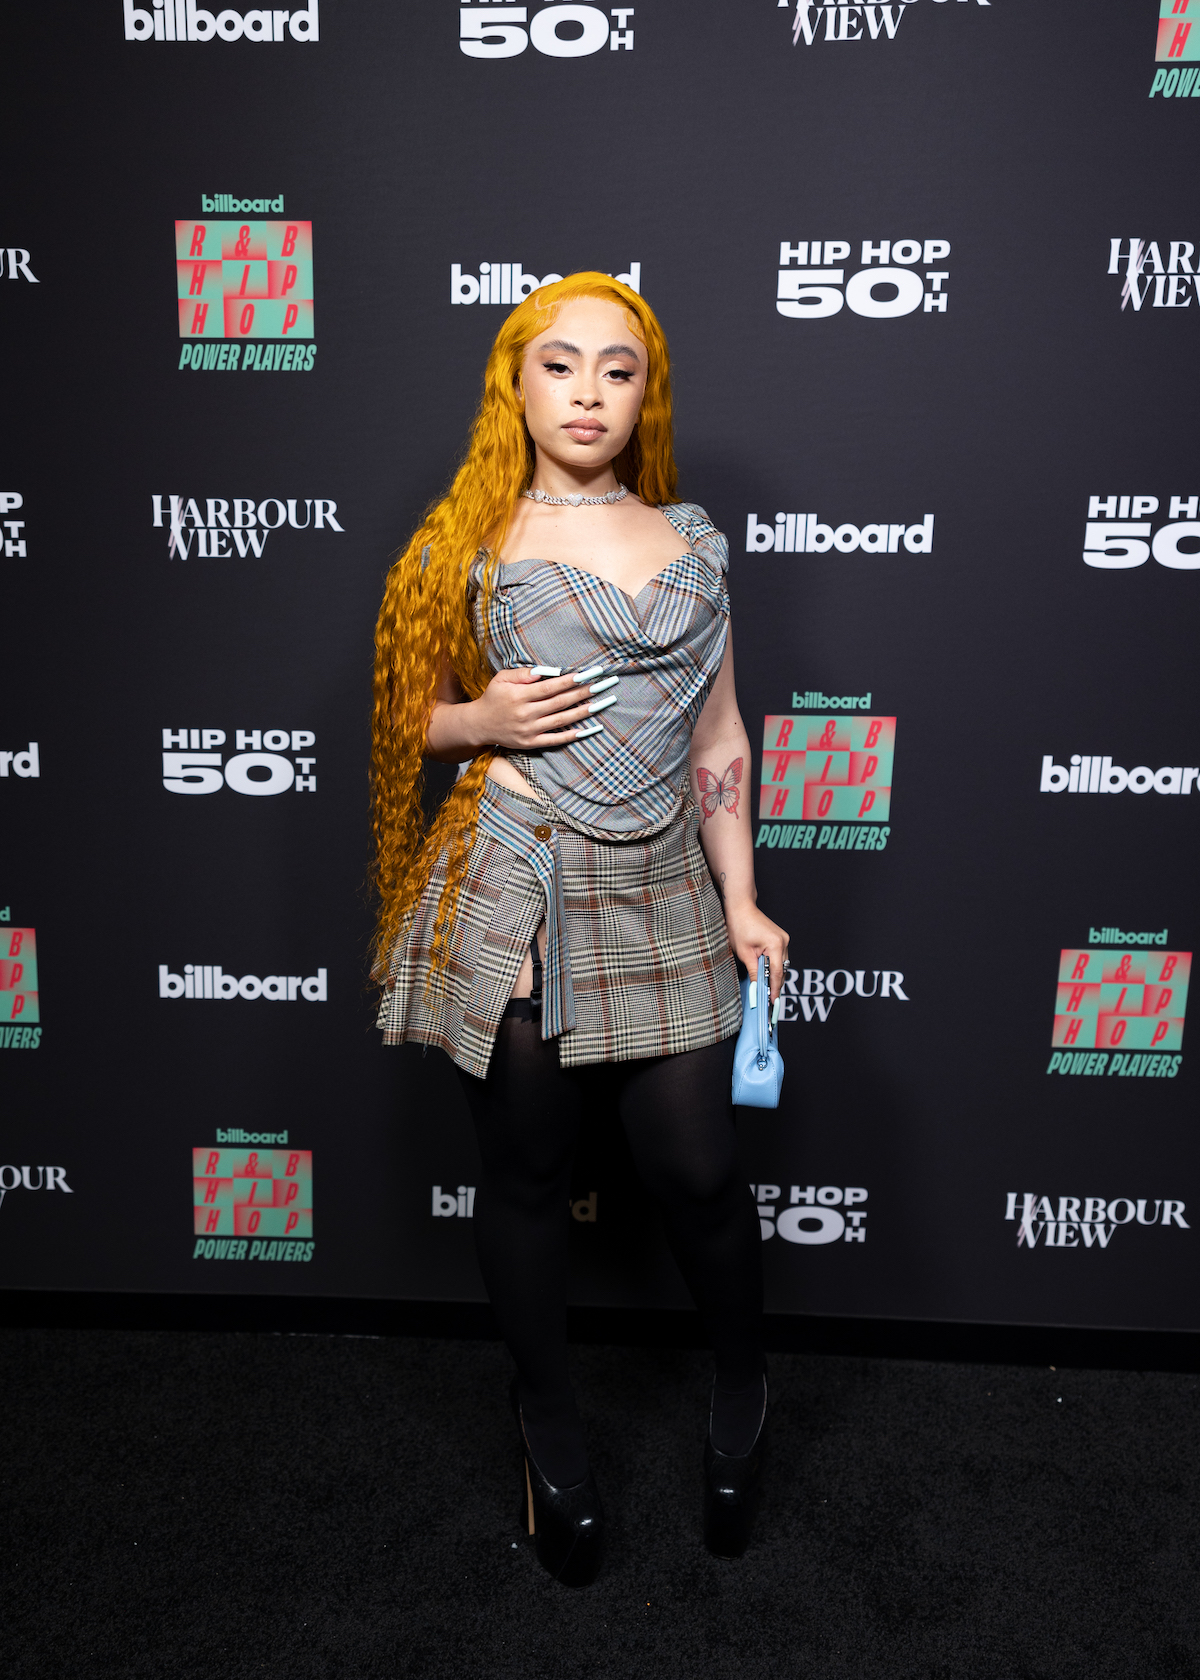 ICE SPICE, LARRY JACKSON, LIL WAYNE, AND NAS HONORED AT BILLBOARD’S 2023 R&B/HIP-HOP POWER PLAYERS EVENT